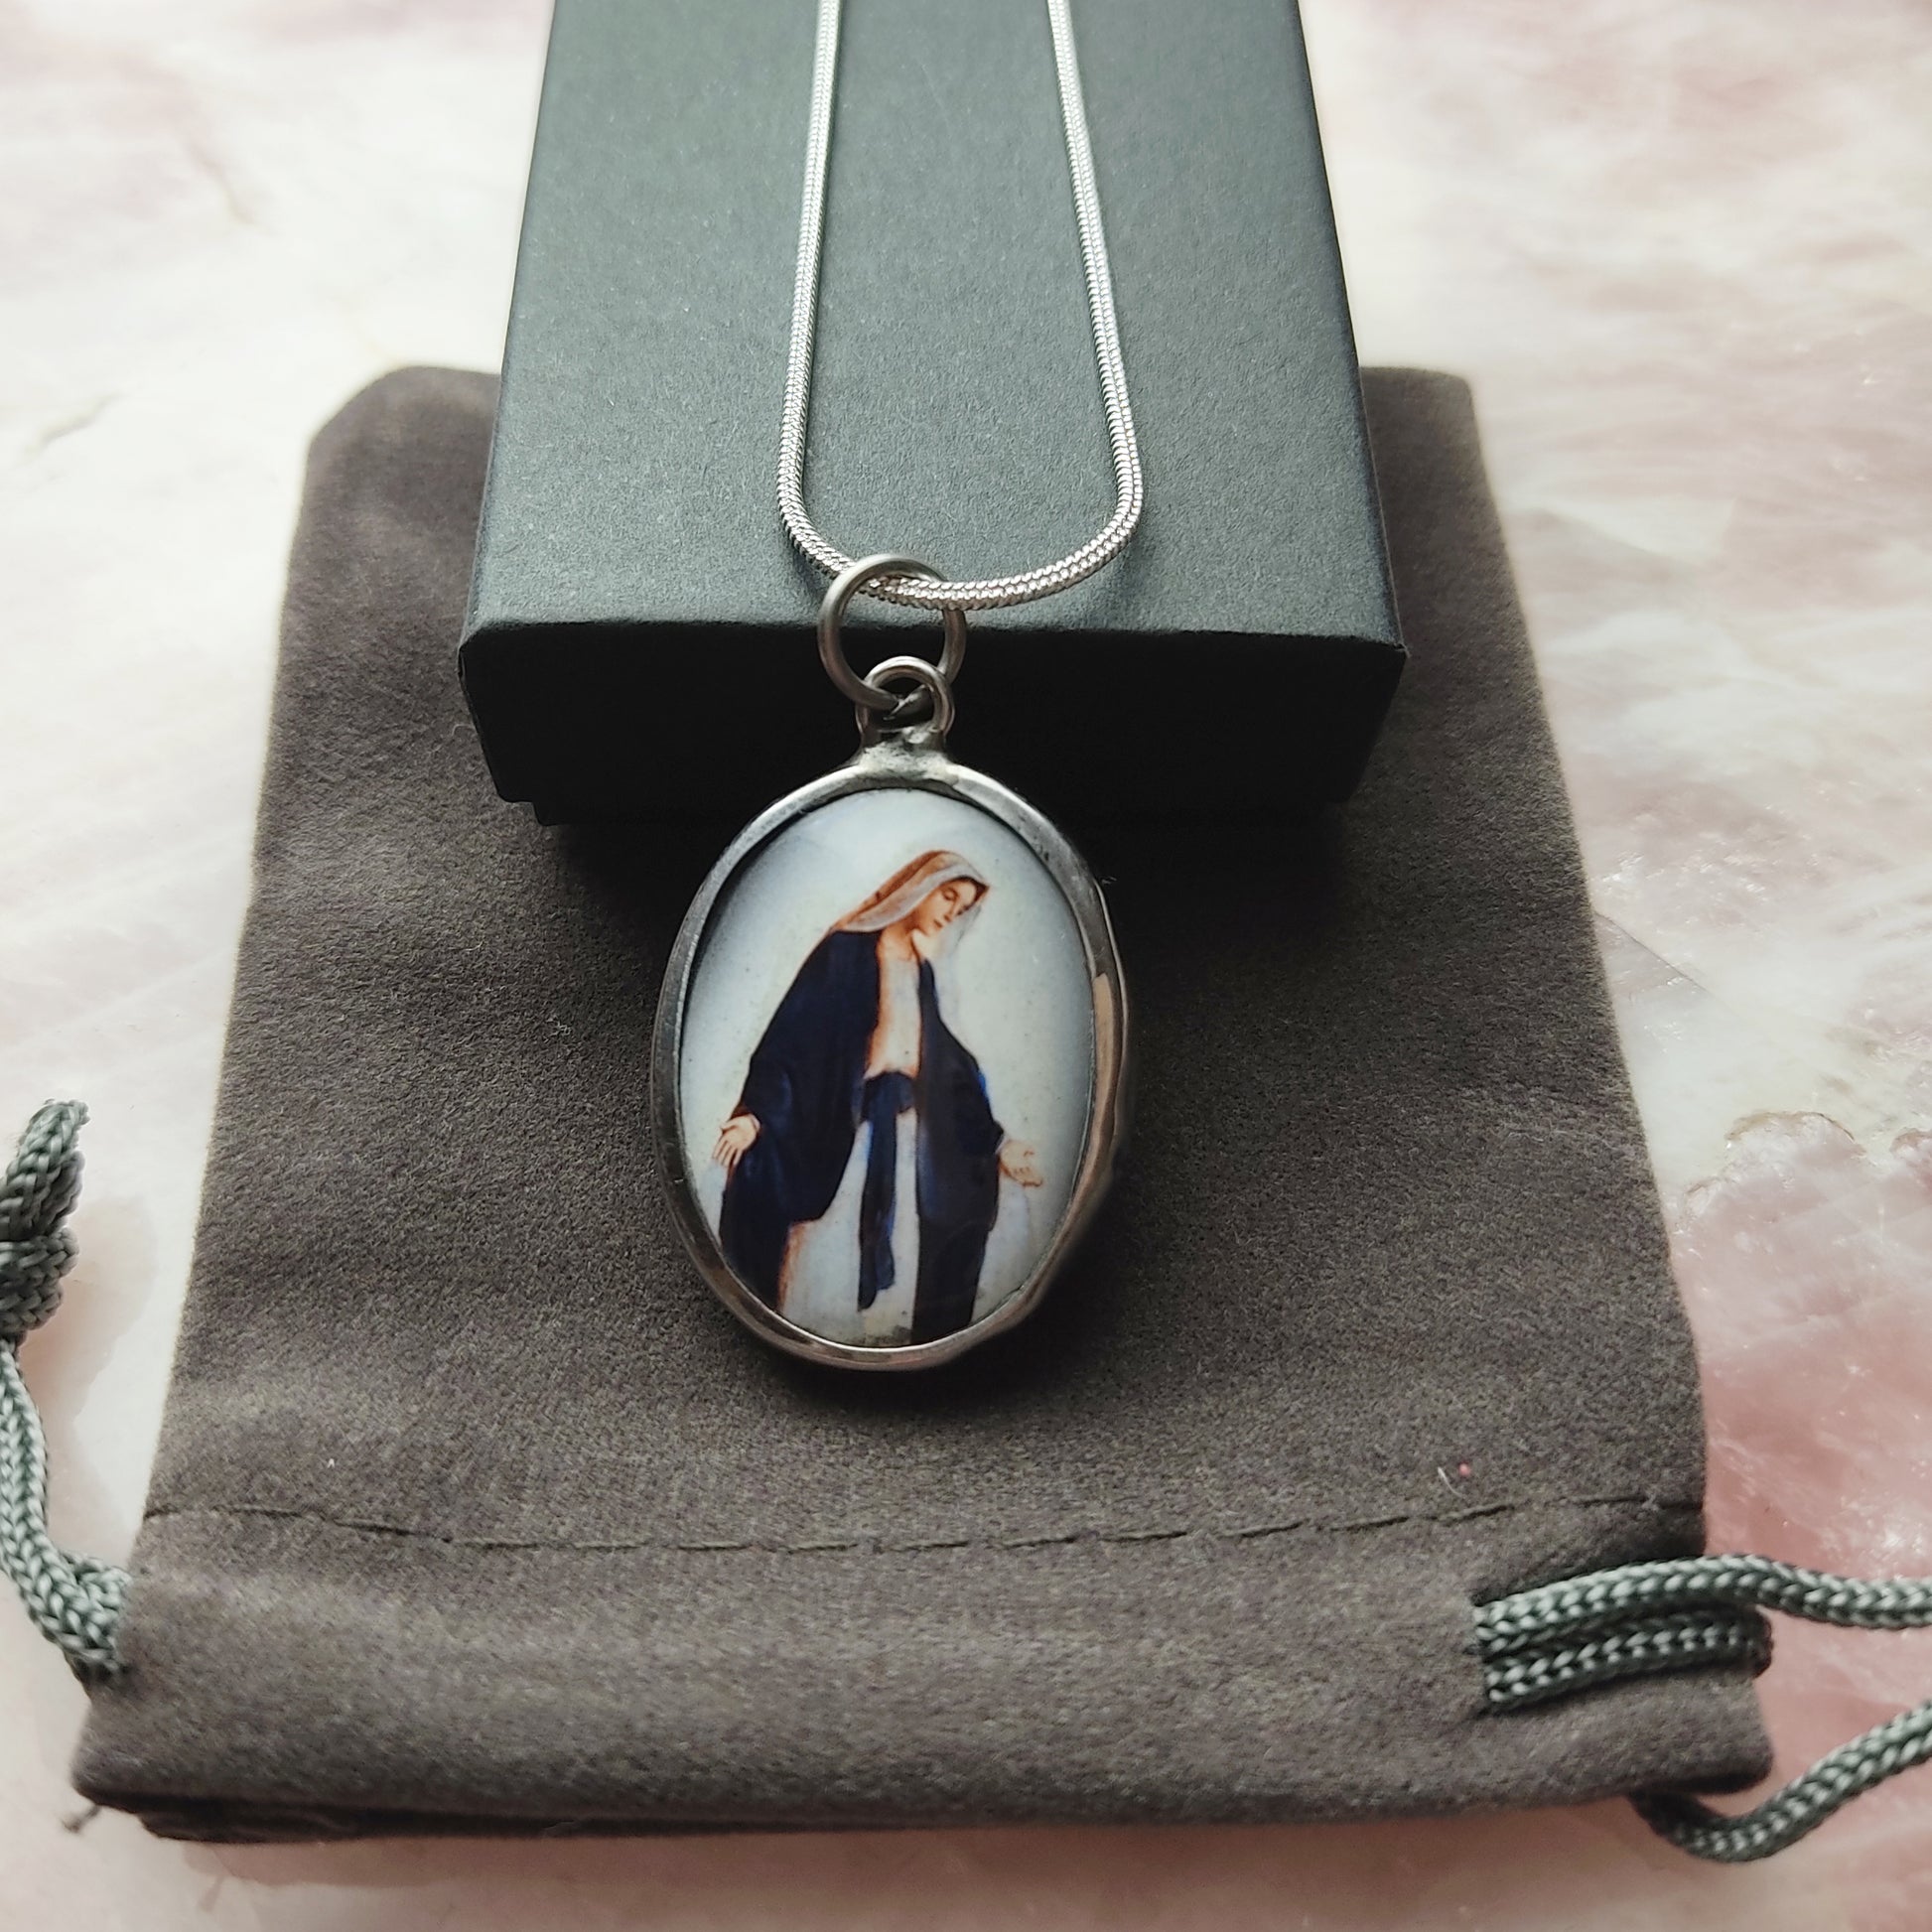 mary cross pendant necklace gift